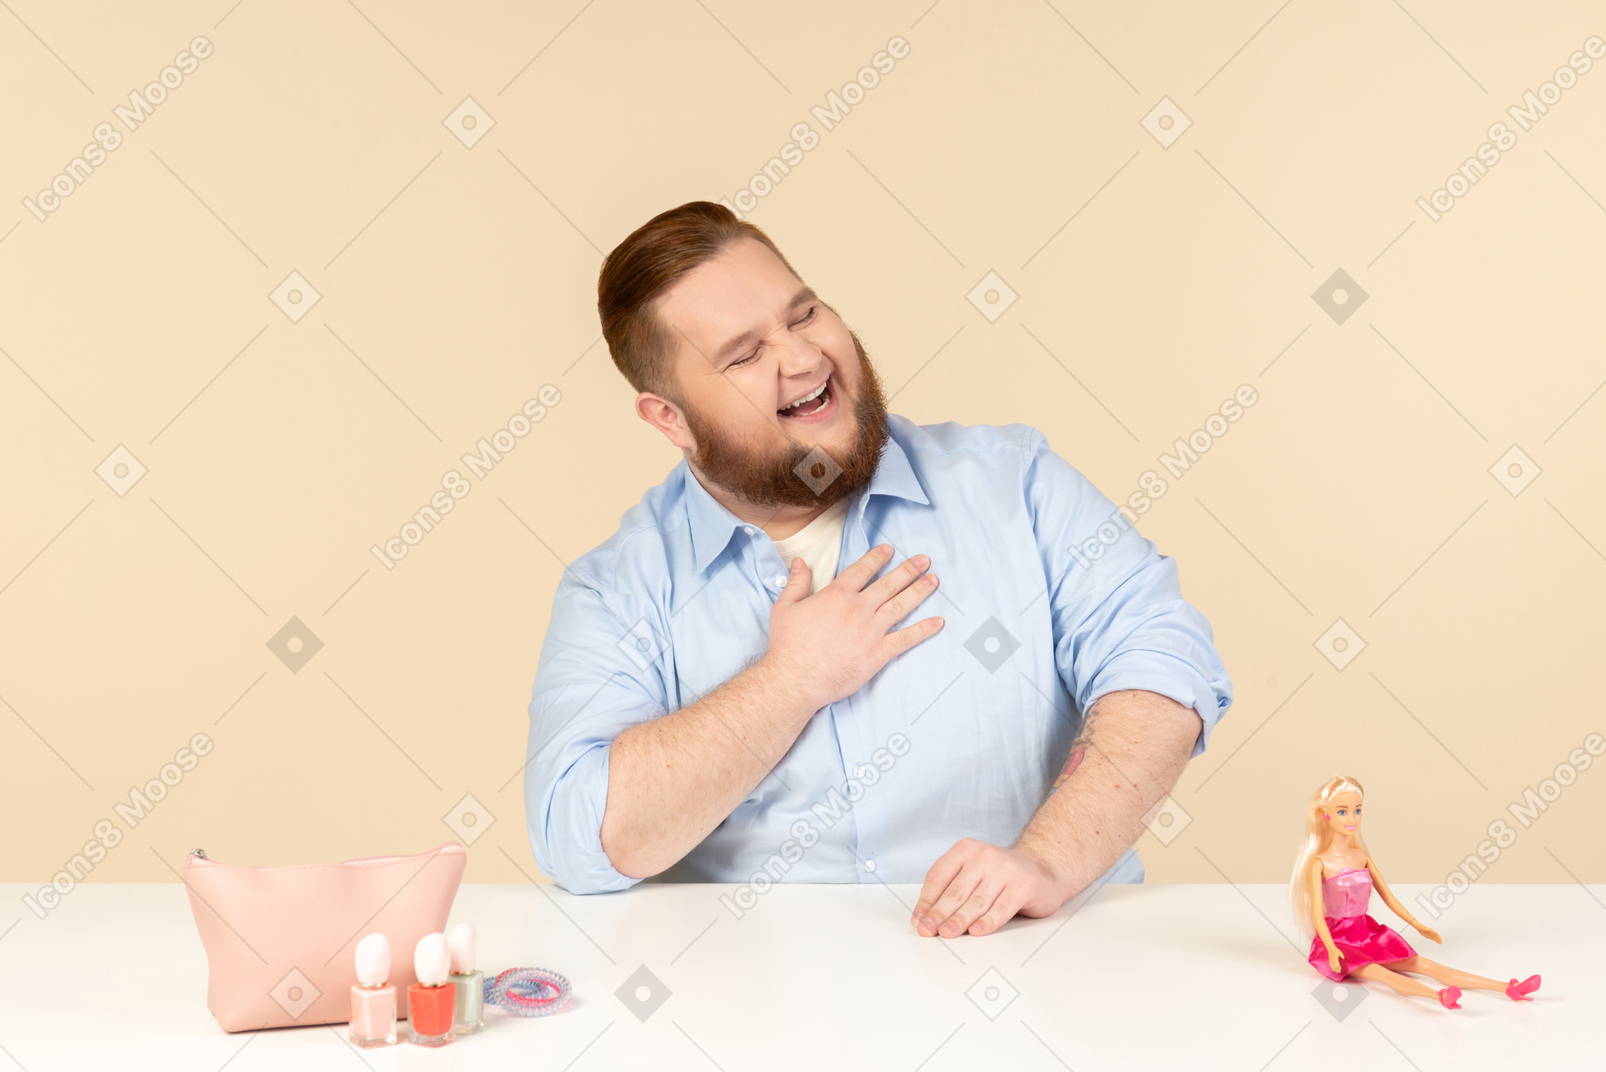 Laughing big man sitting at the table with cosmetics and barbie doll on it